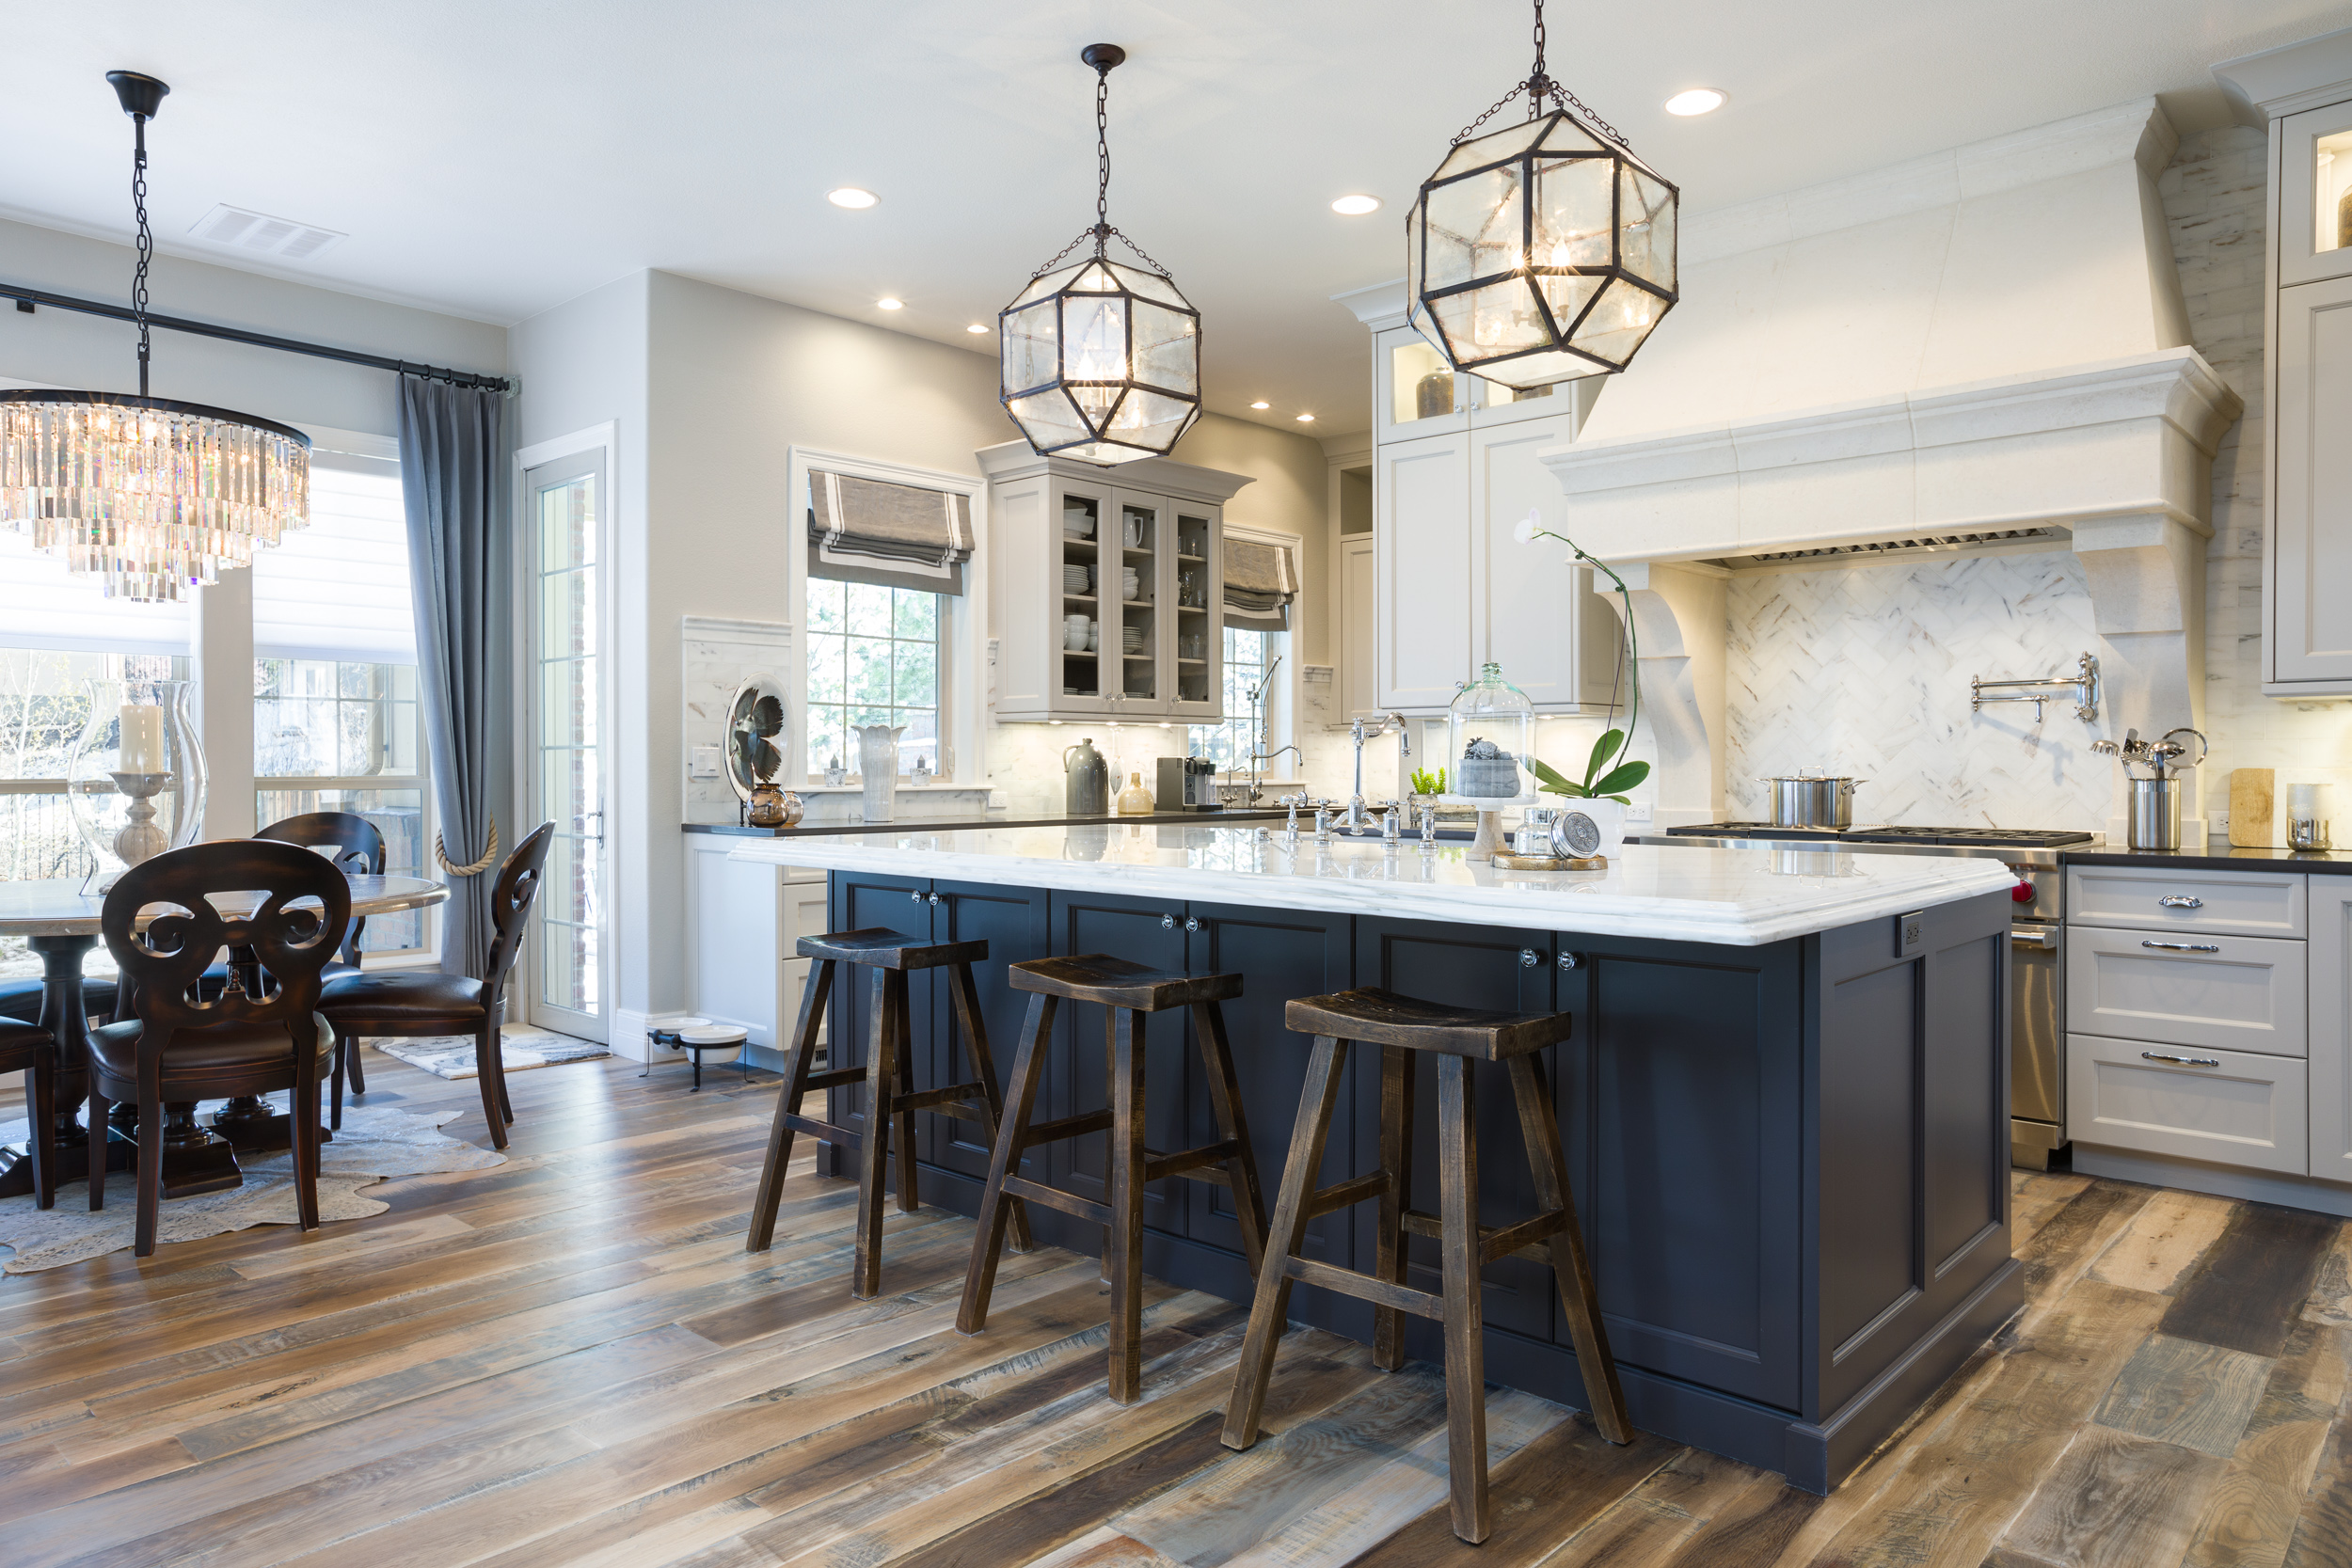 Interiors — Colorado Architectural Photographer - Weinrauch Photography